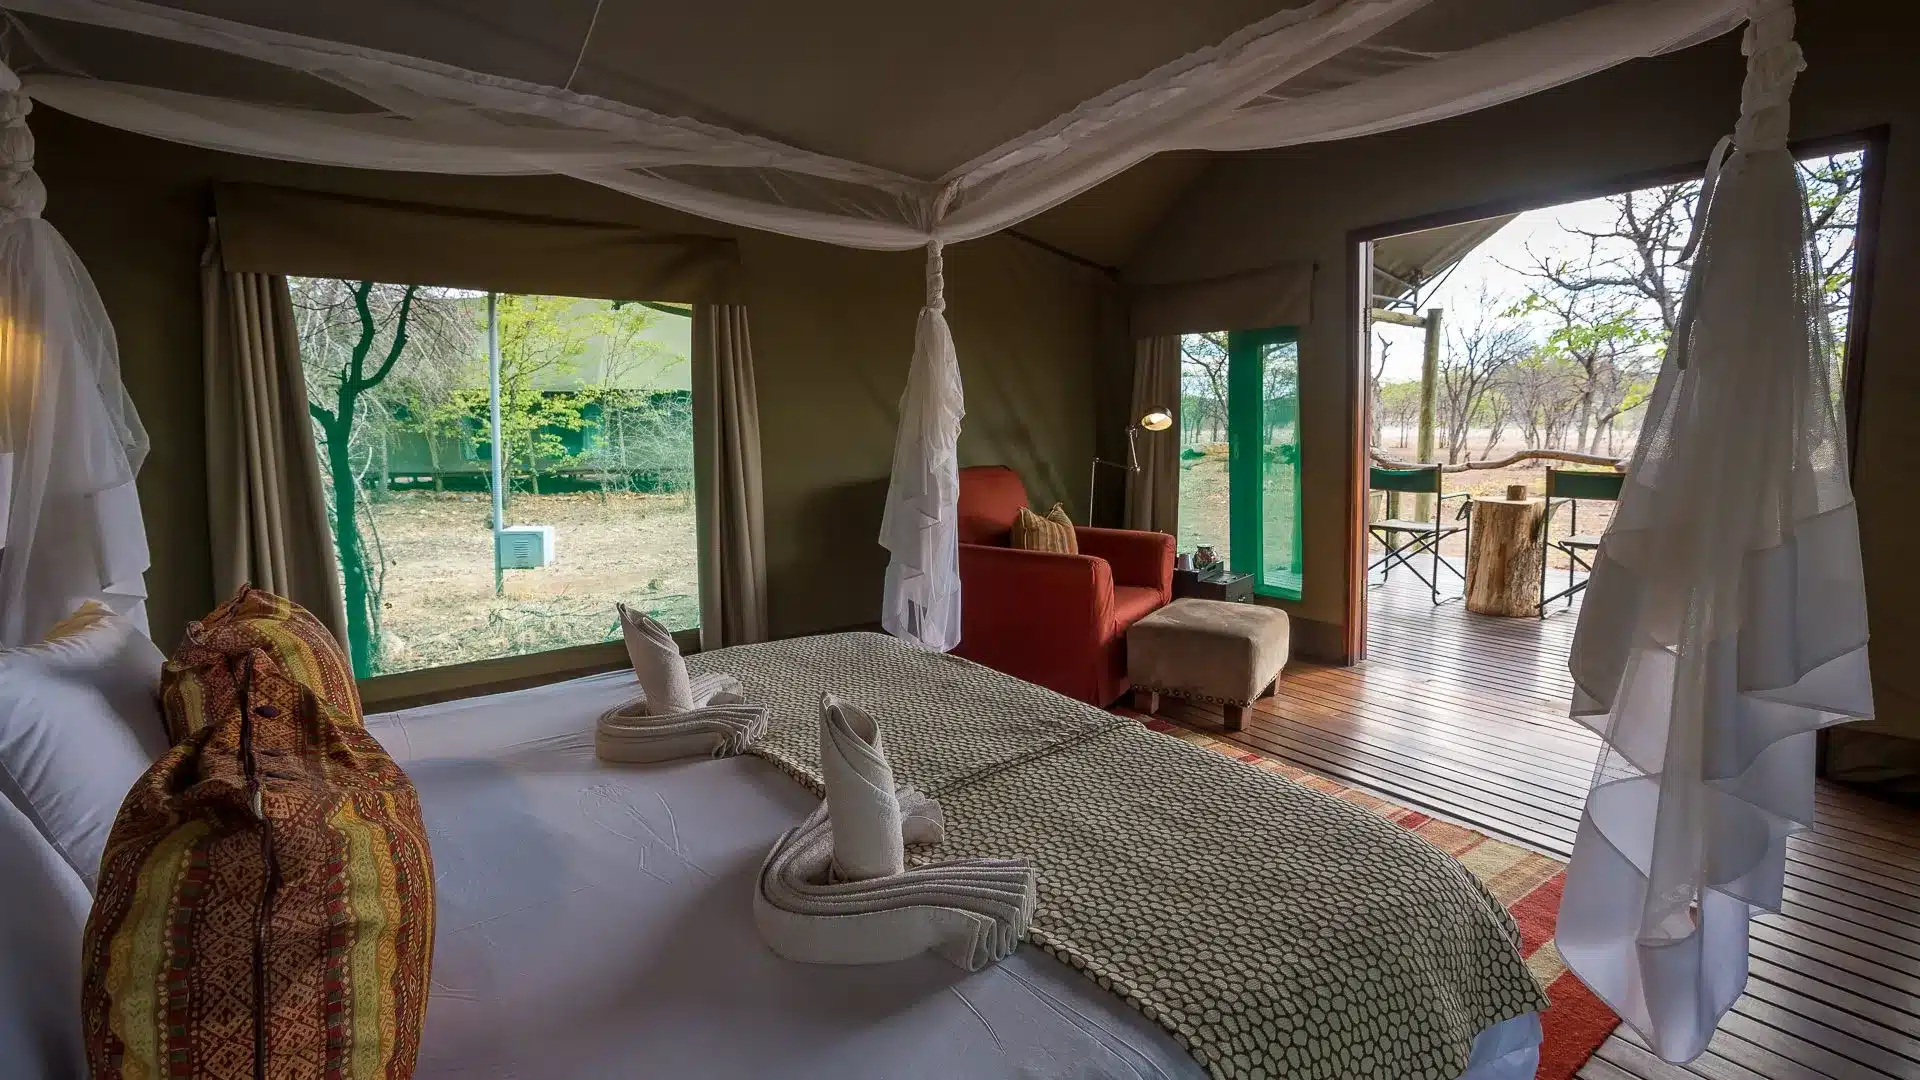 42 Ongava Tented Camp